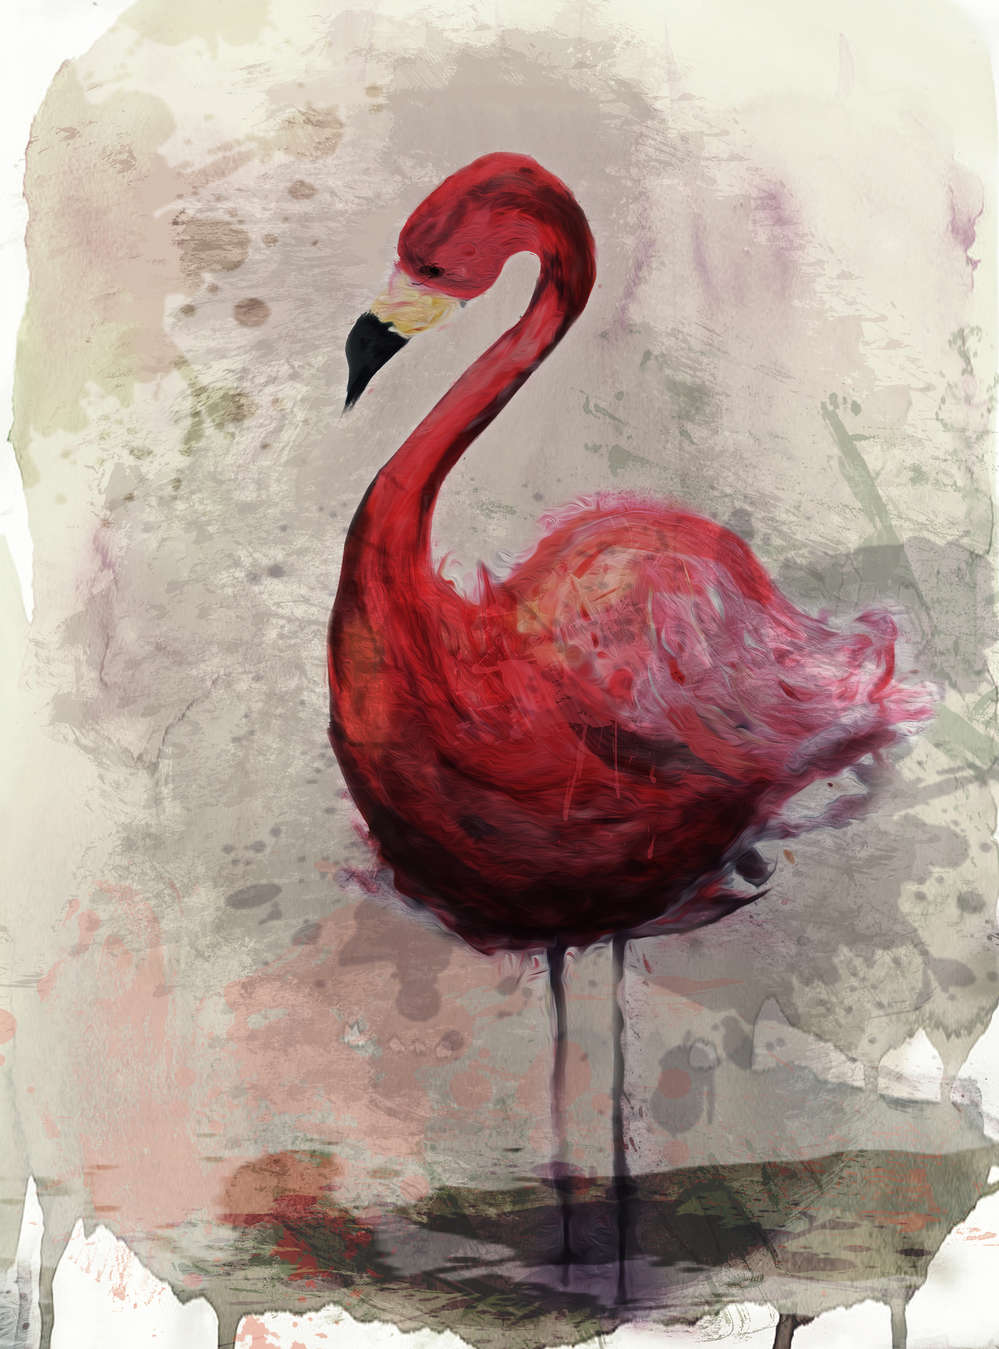             Watercolour mural with flamingo motif in drawing style
        